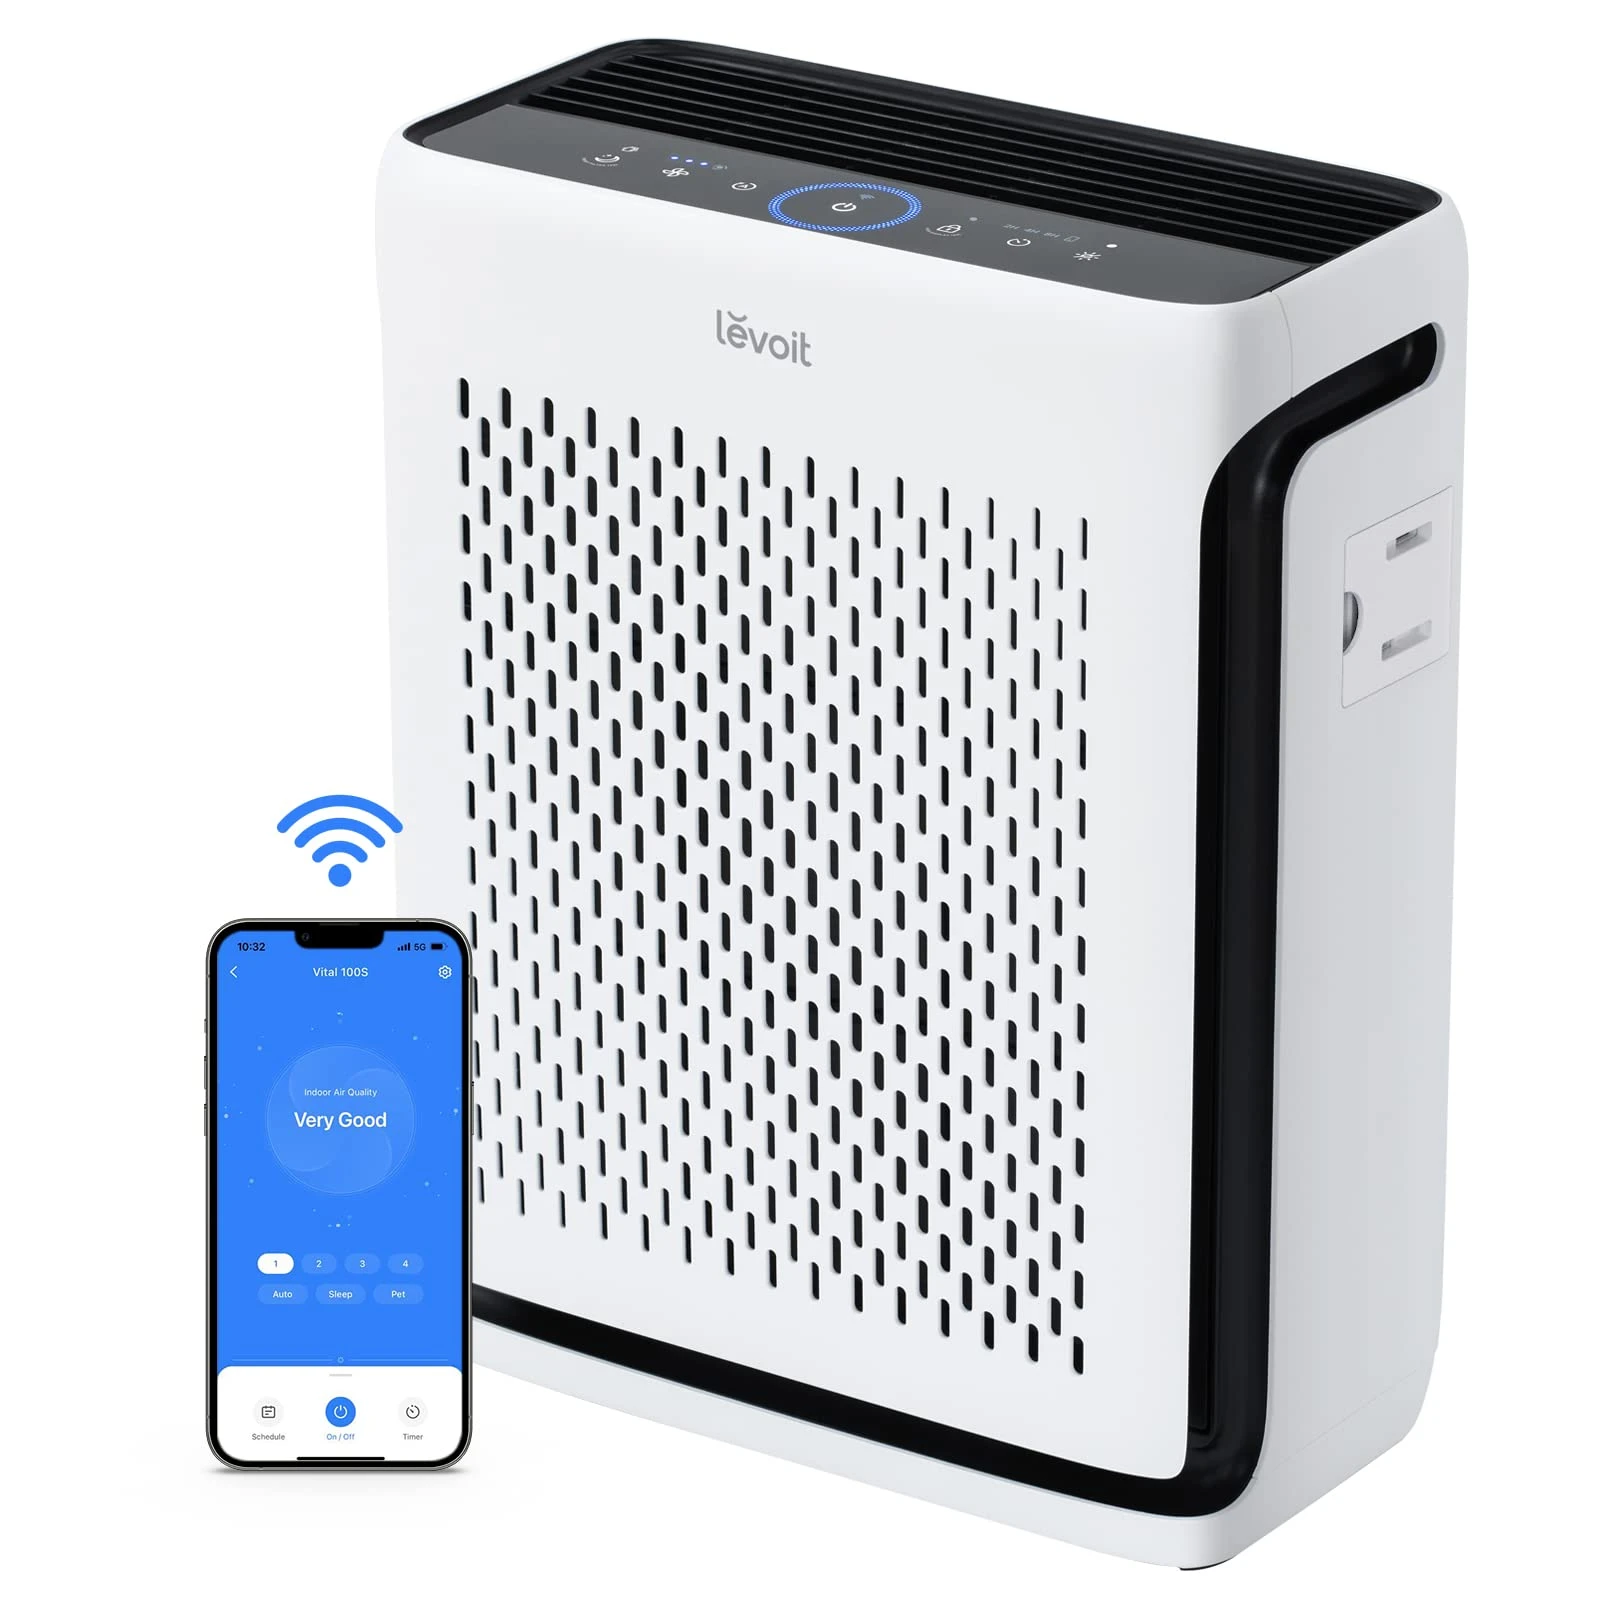 Levoit Air Purifiers for Home Allergies with True HEPA Filter, Display Off,  3 Speeds, Night Light, Filter Change Reminder, Quiet Air Filter for Dust